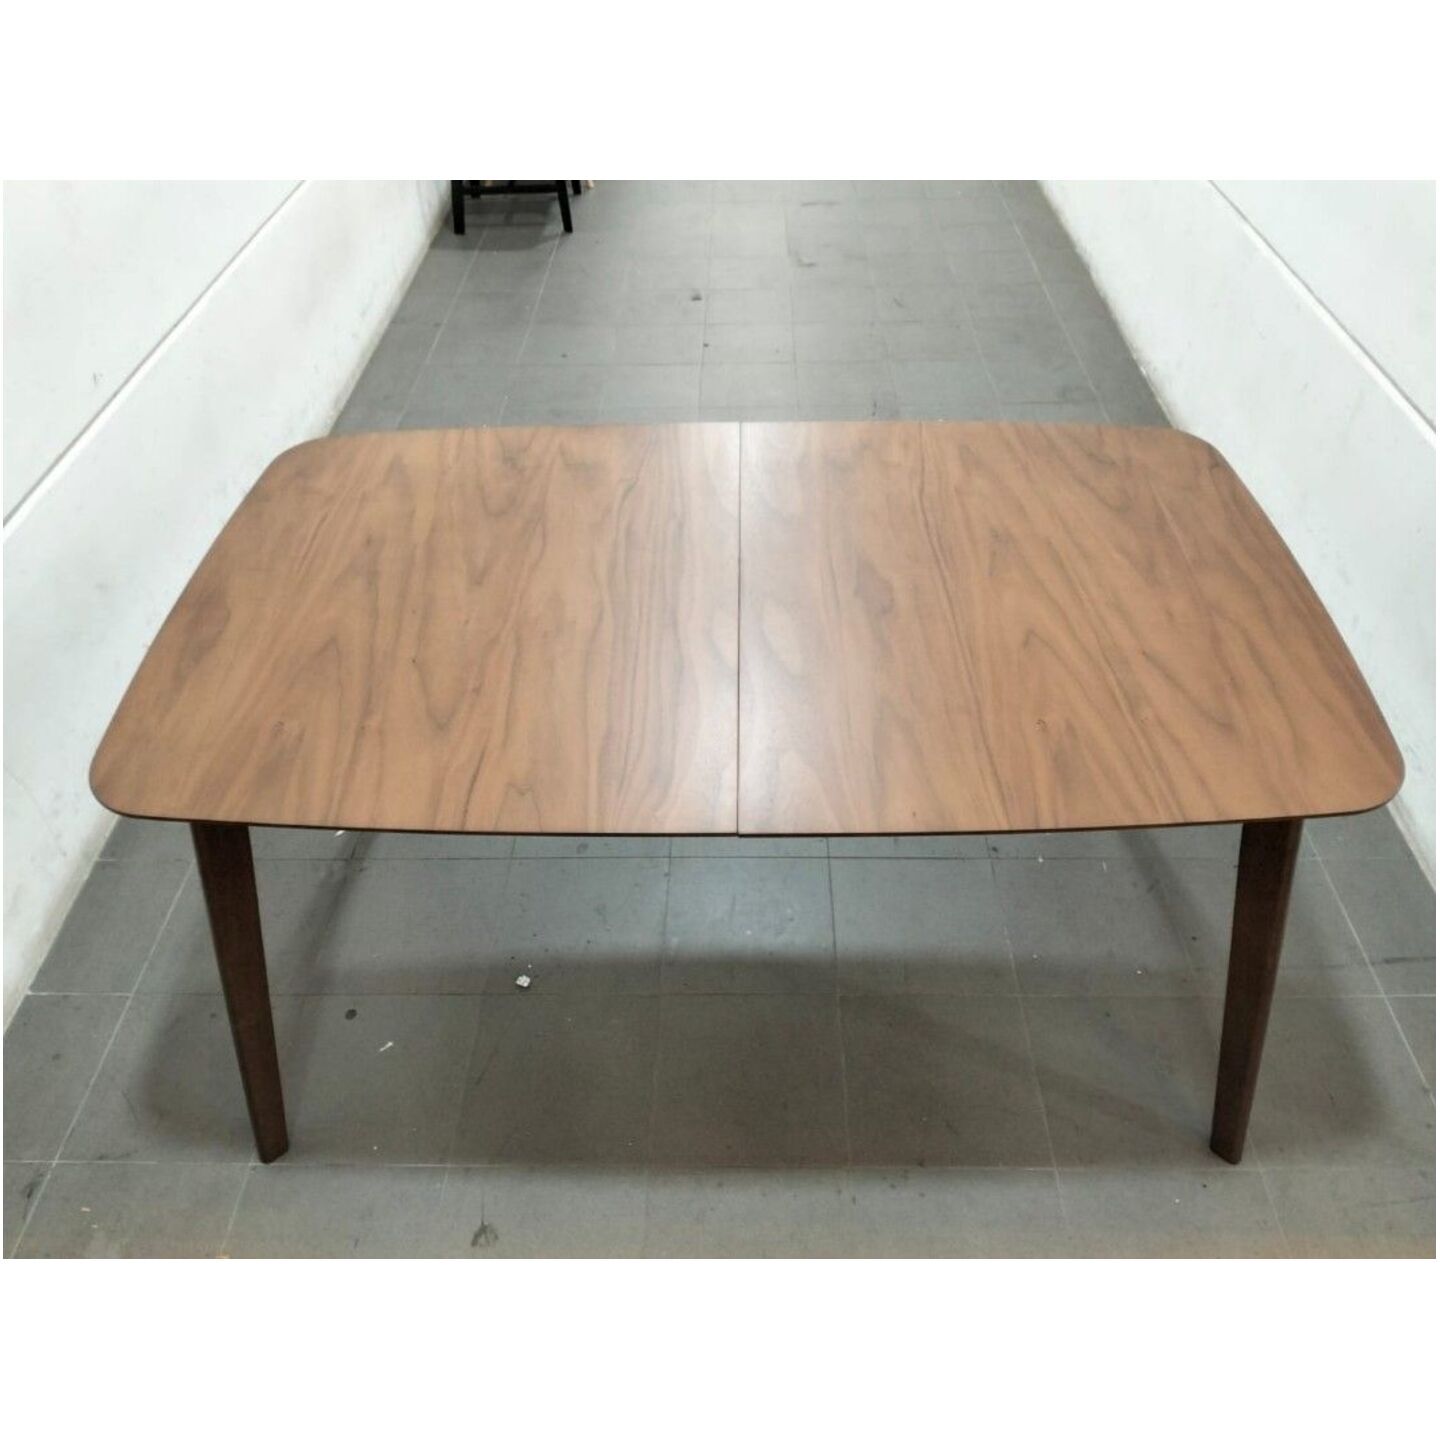 TRAX Extendable Dining Table in WALNUT